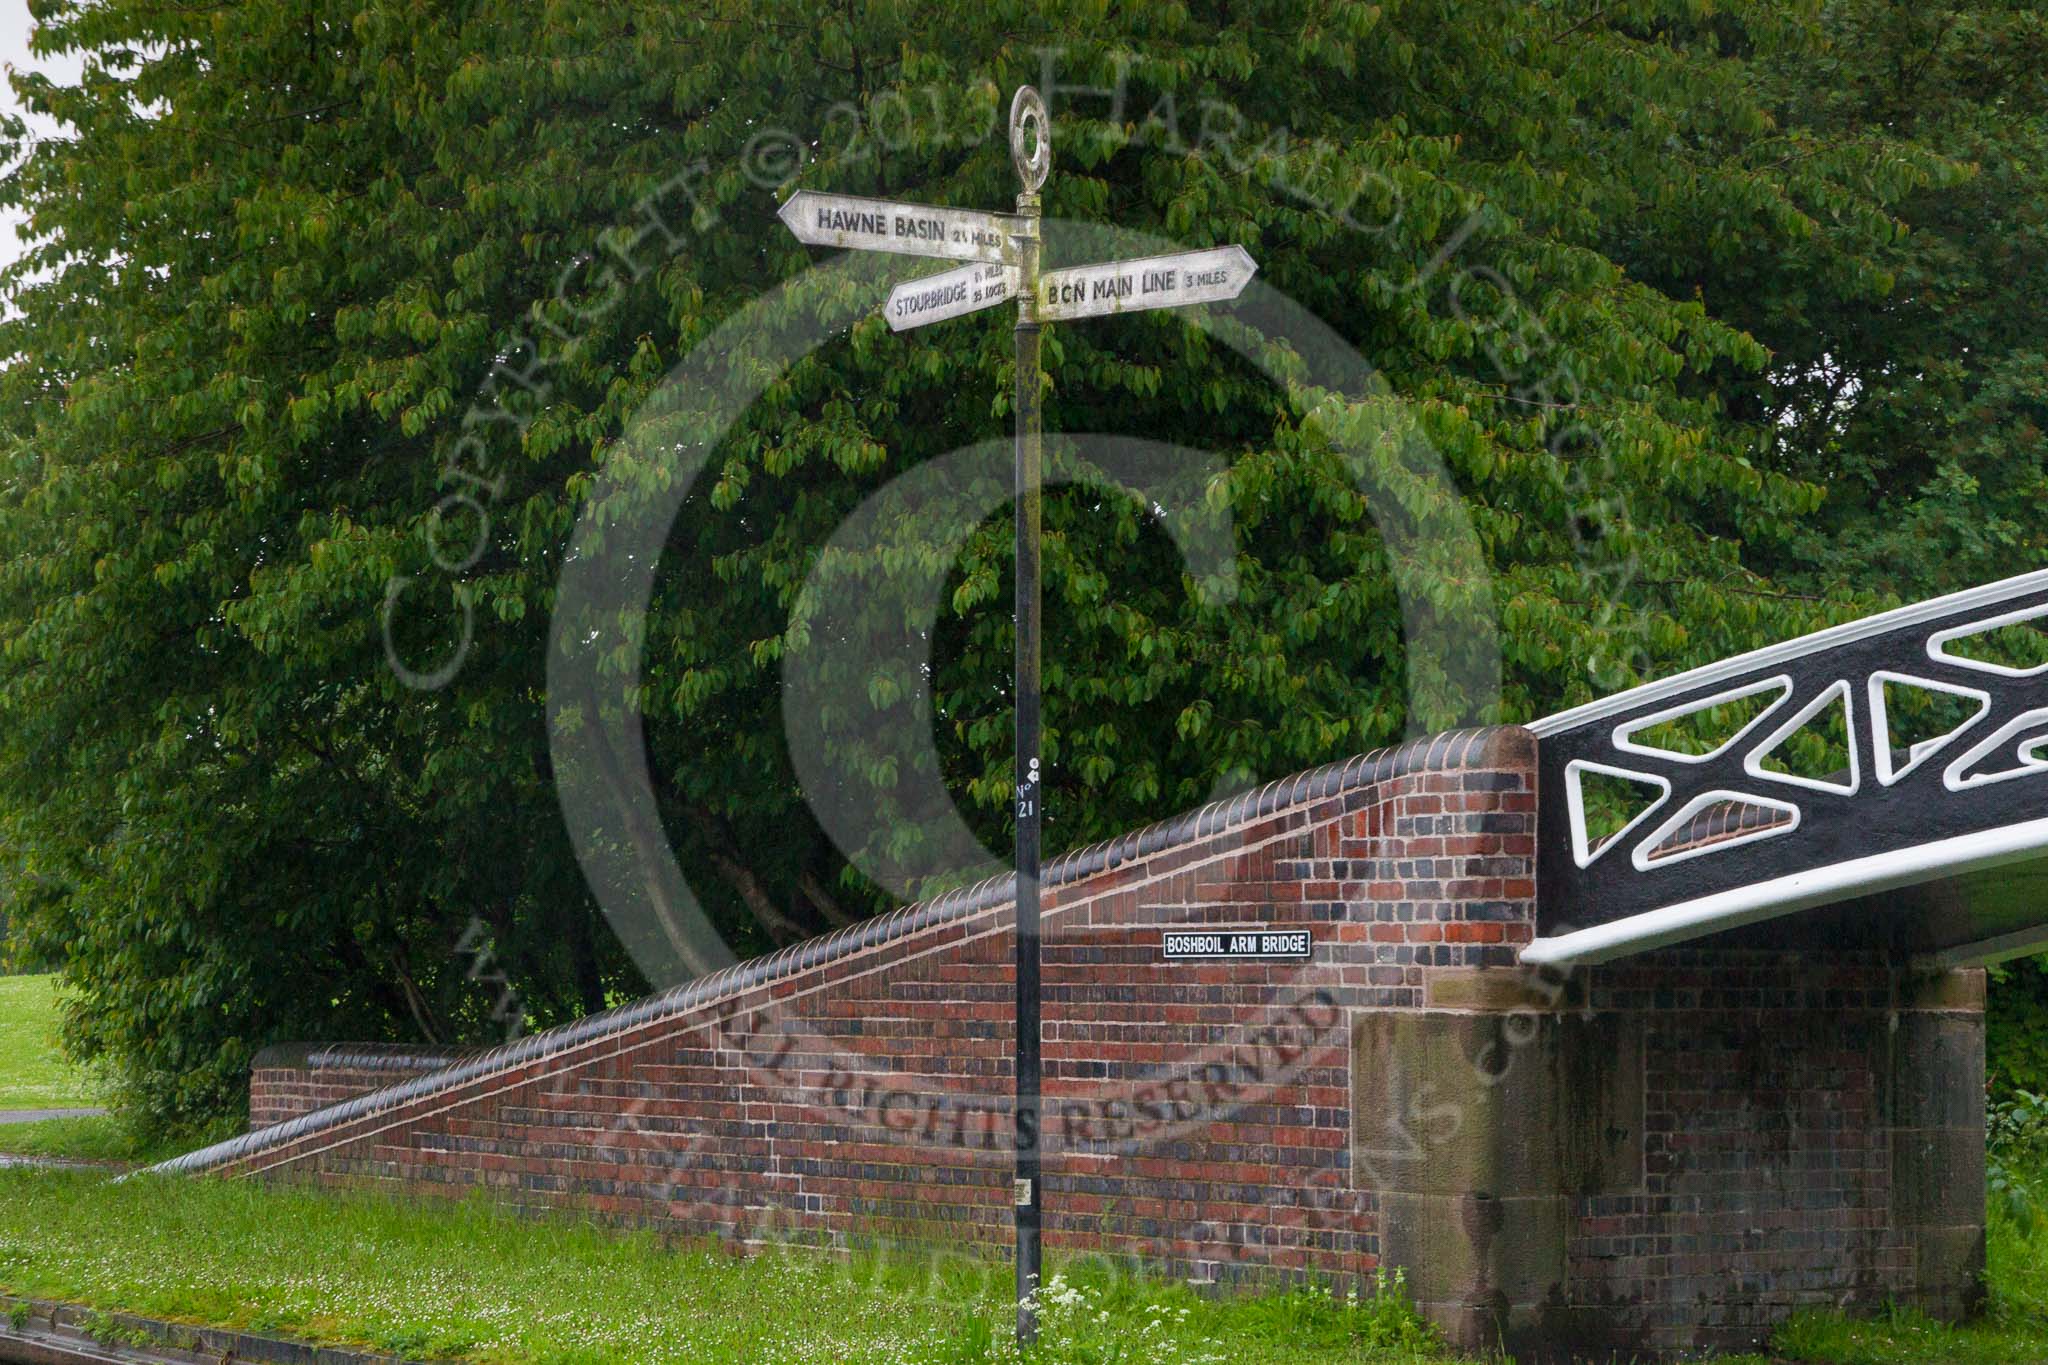 BCN Marathon Challenge 2014: Signpost at Windmill End Junction of the Dudley No 1 and No 2 Canal. It reads "Stourbridge 8 1/2 miles 25 locks", "Hawne Basin 2 1/4 miles", and "BCN Main Line 3 miles".
Birmingham Canal Navigation,


United Kingdom,
on 25 May 2014 at 06:36, image #201